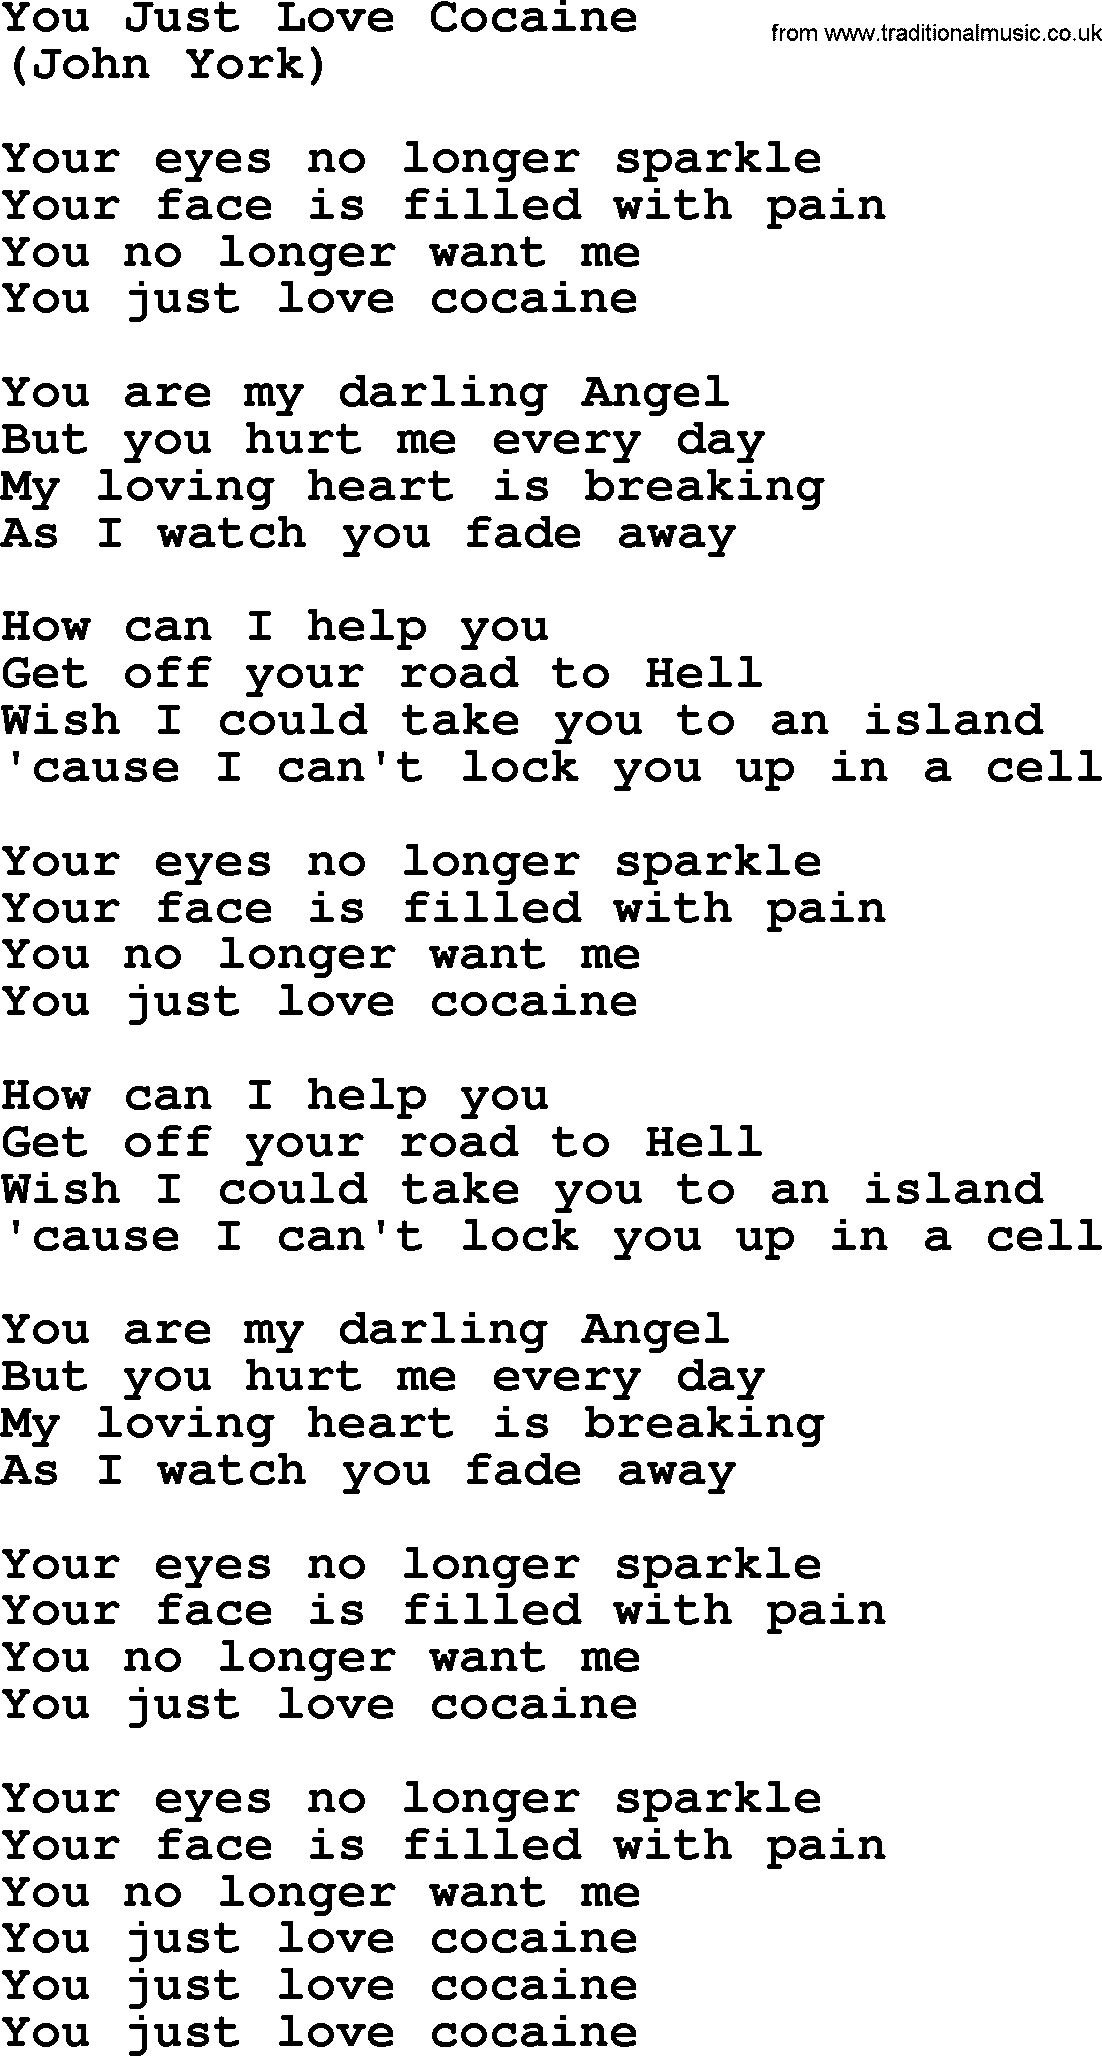 The Byrds song You Just Love Cocaine, lyrics